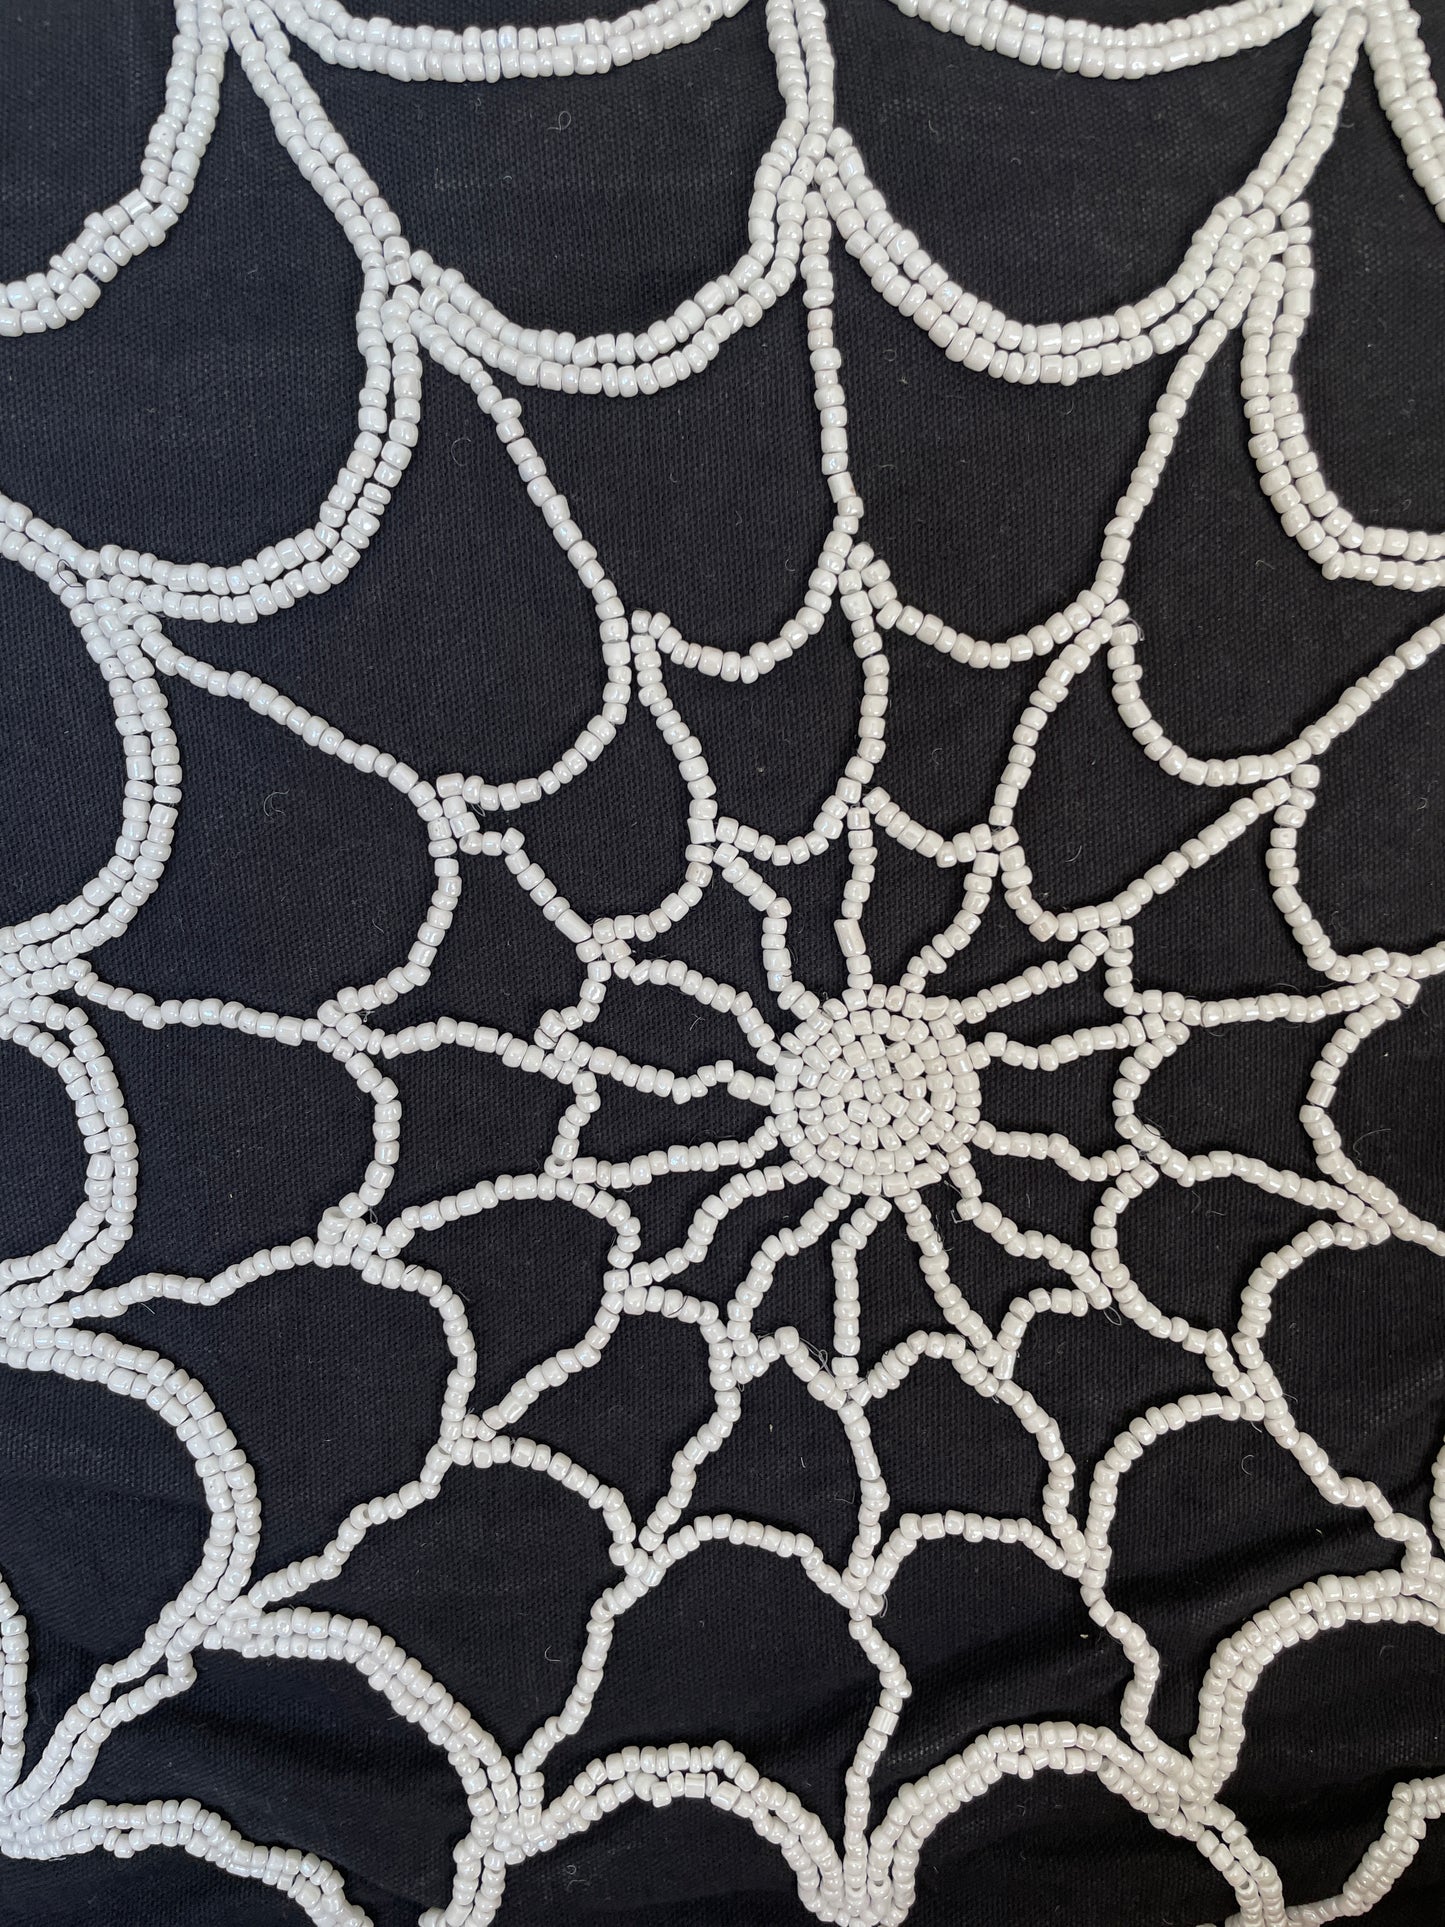 Black Pillow With Beaded Spider Web